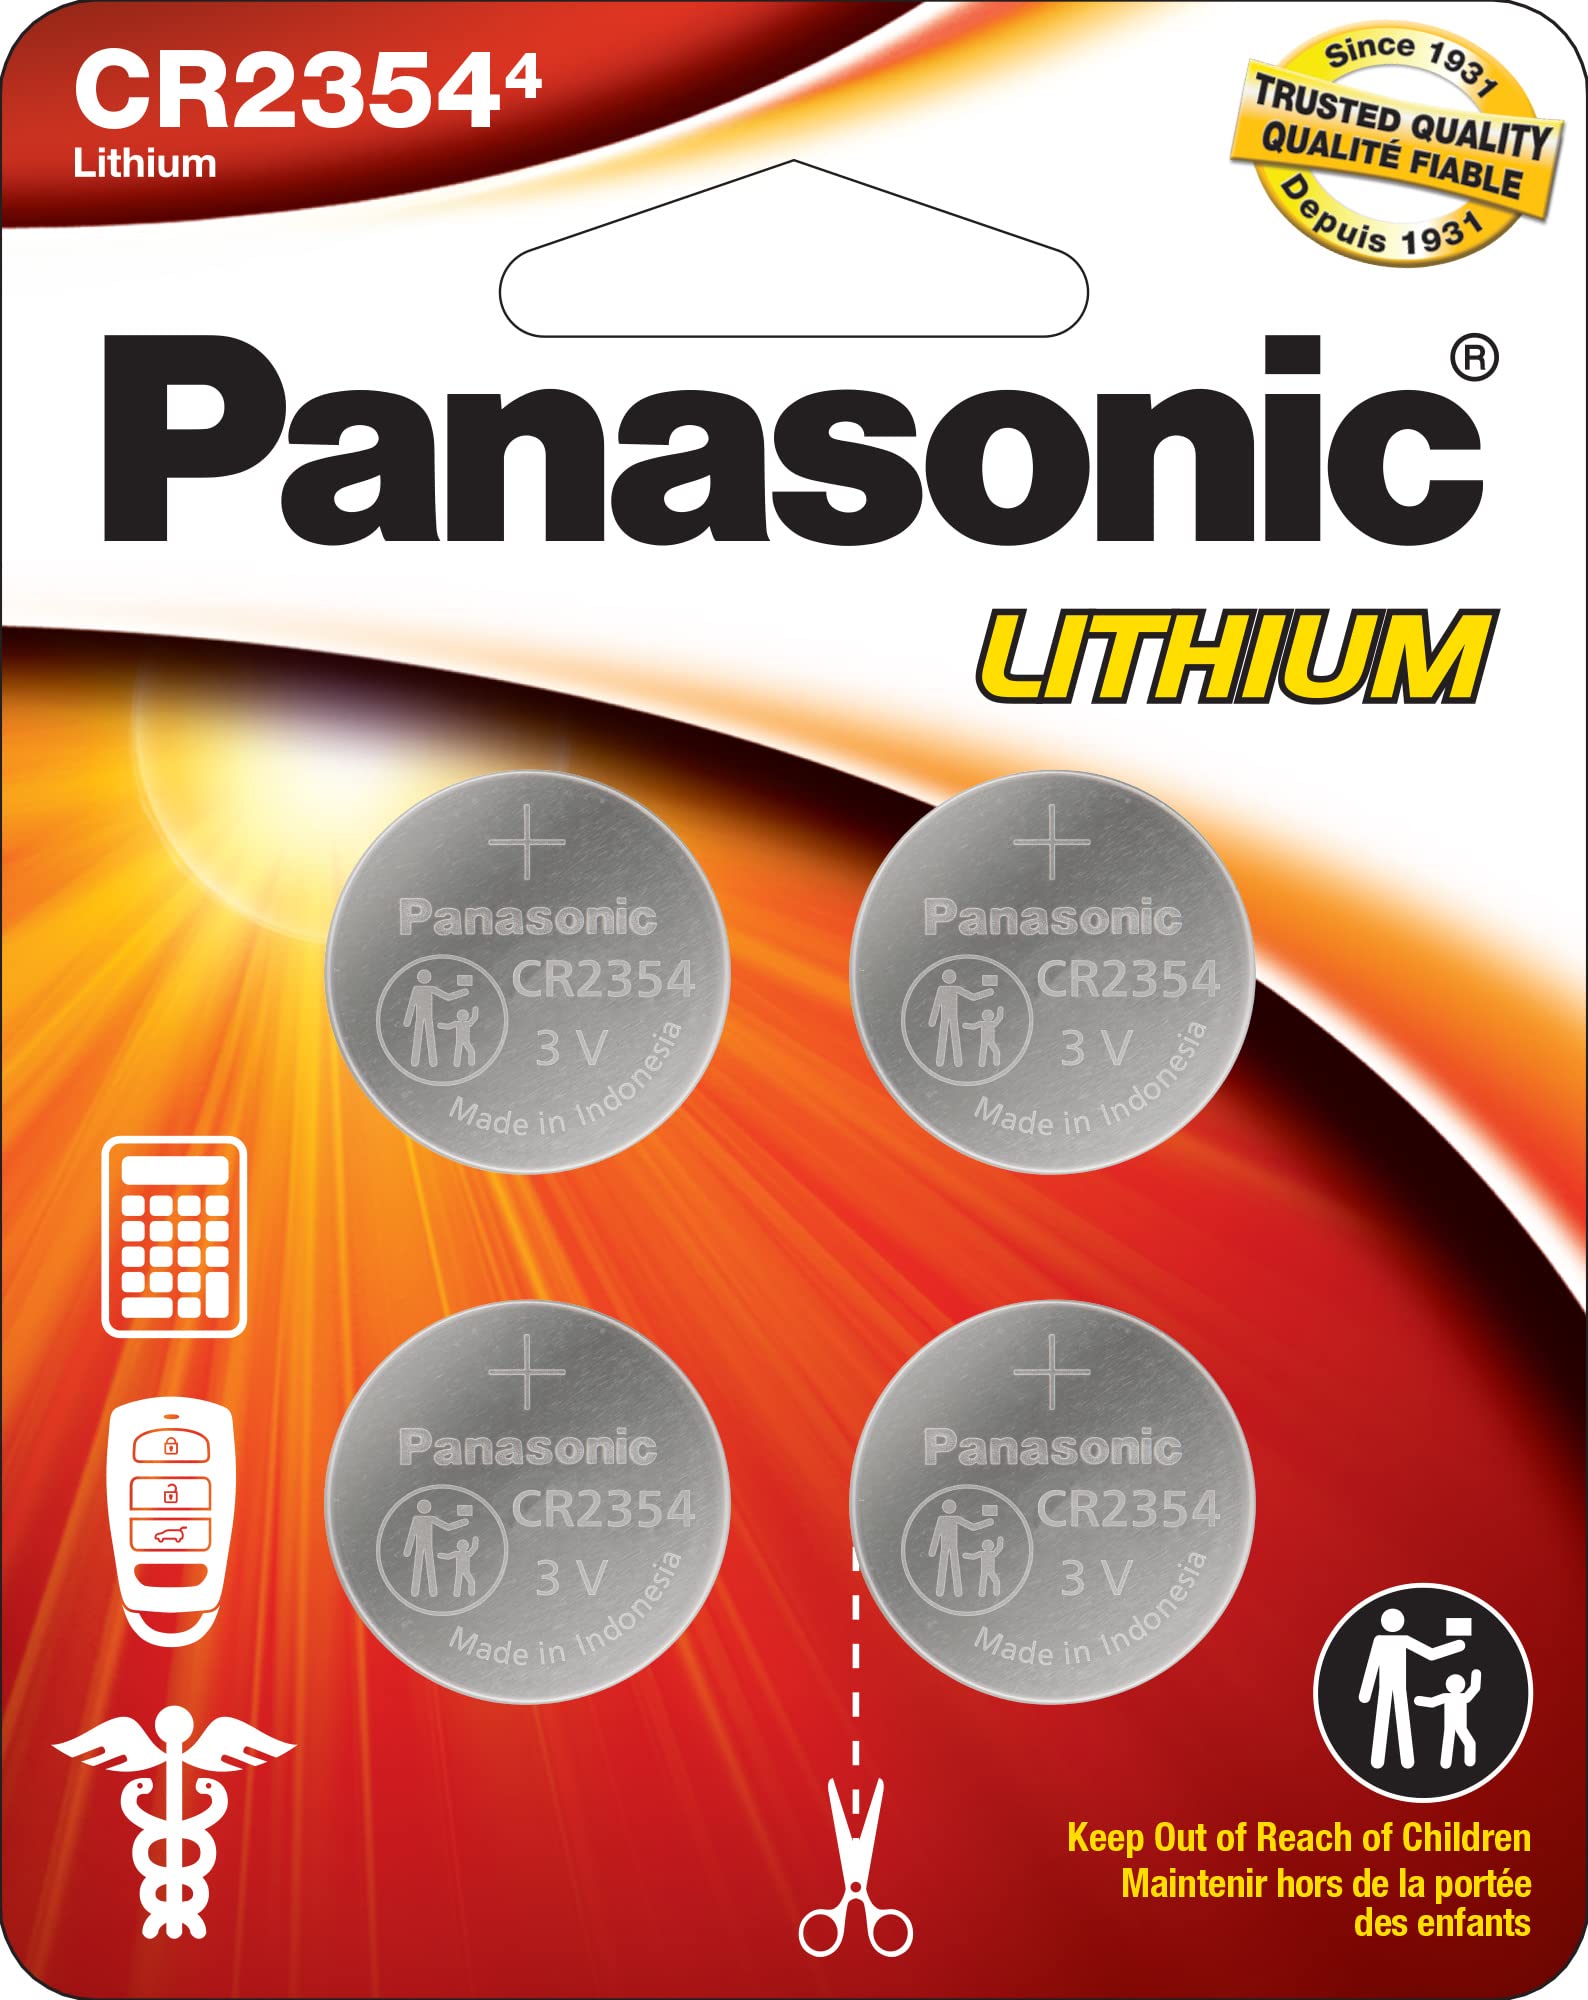 Panasonic CR2354 3.0 Volt Long Lasting Lithium Coin Cell Batteries in Child Resistant, Standards Based Packaging, 4-Battery Pack